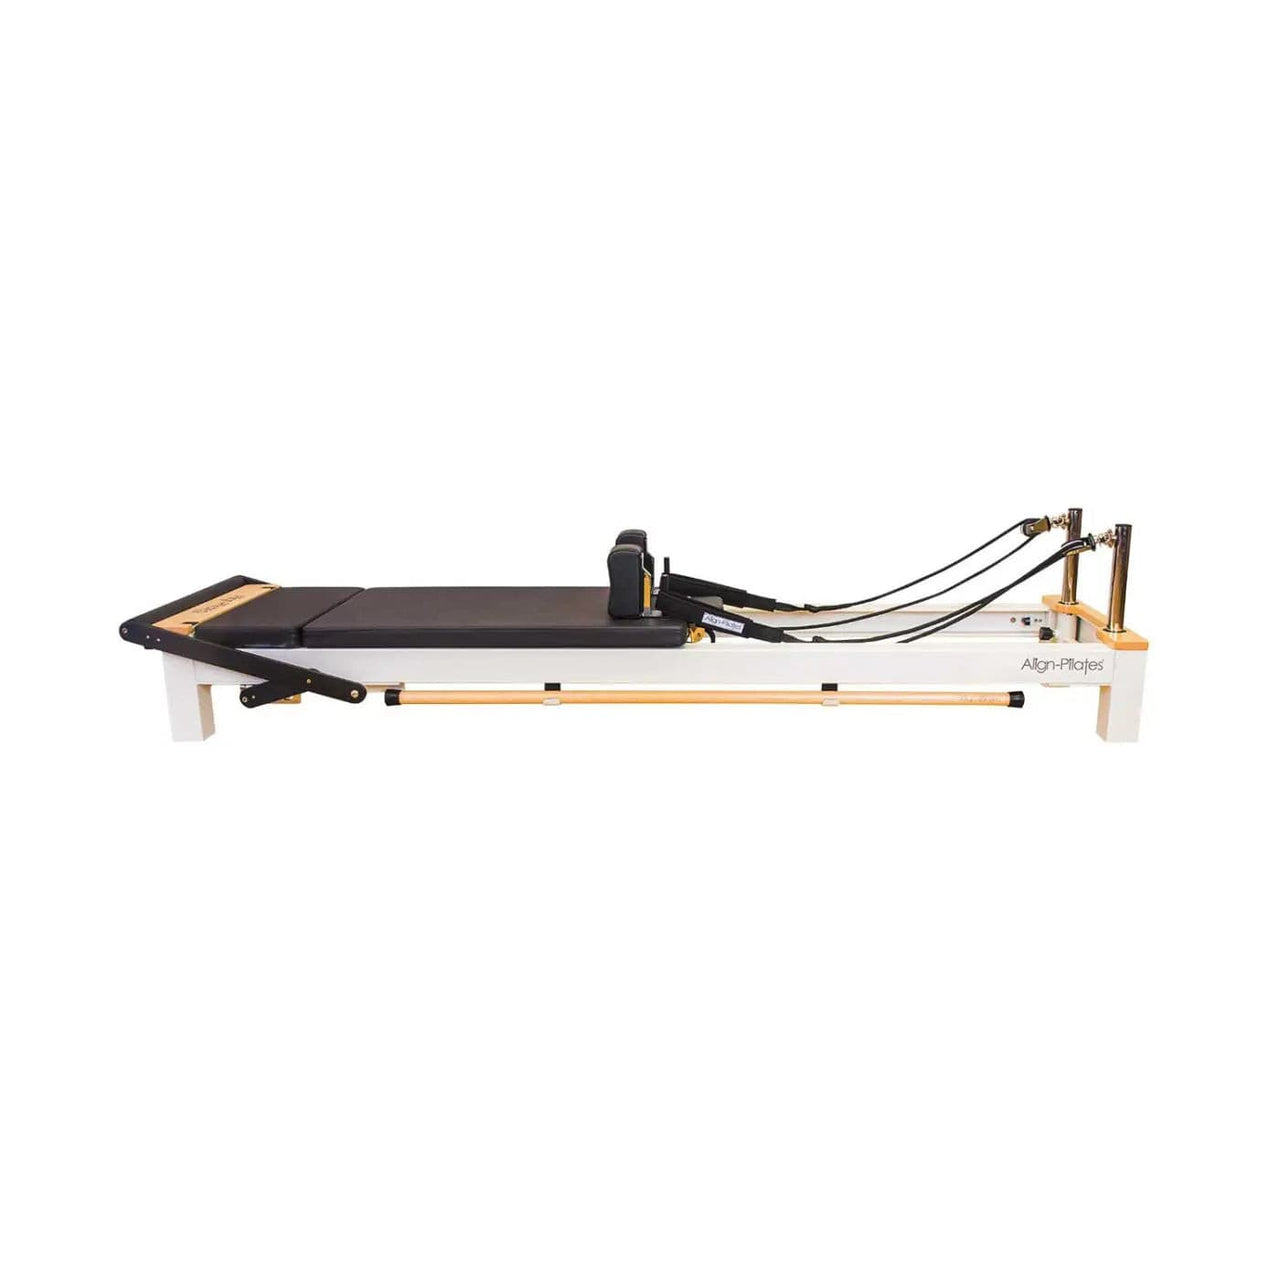 ALIGN-PILATES® C8-S Reformer with Tower Bundle - LUXUSFIT Luxury Exercise & Recovery Equipment